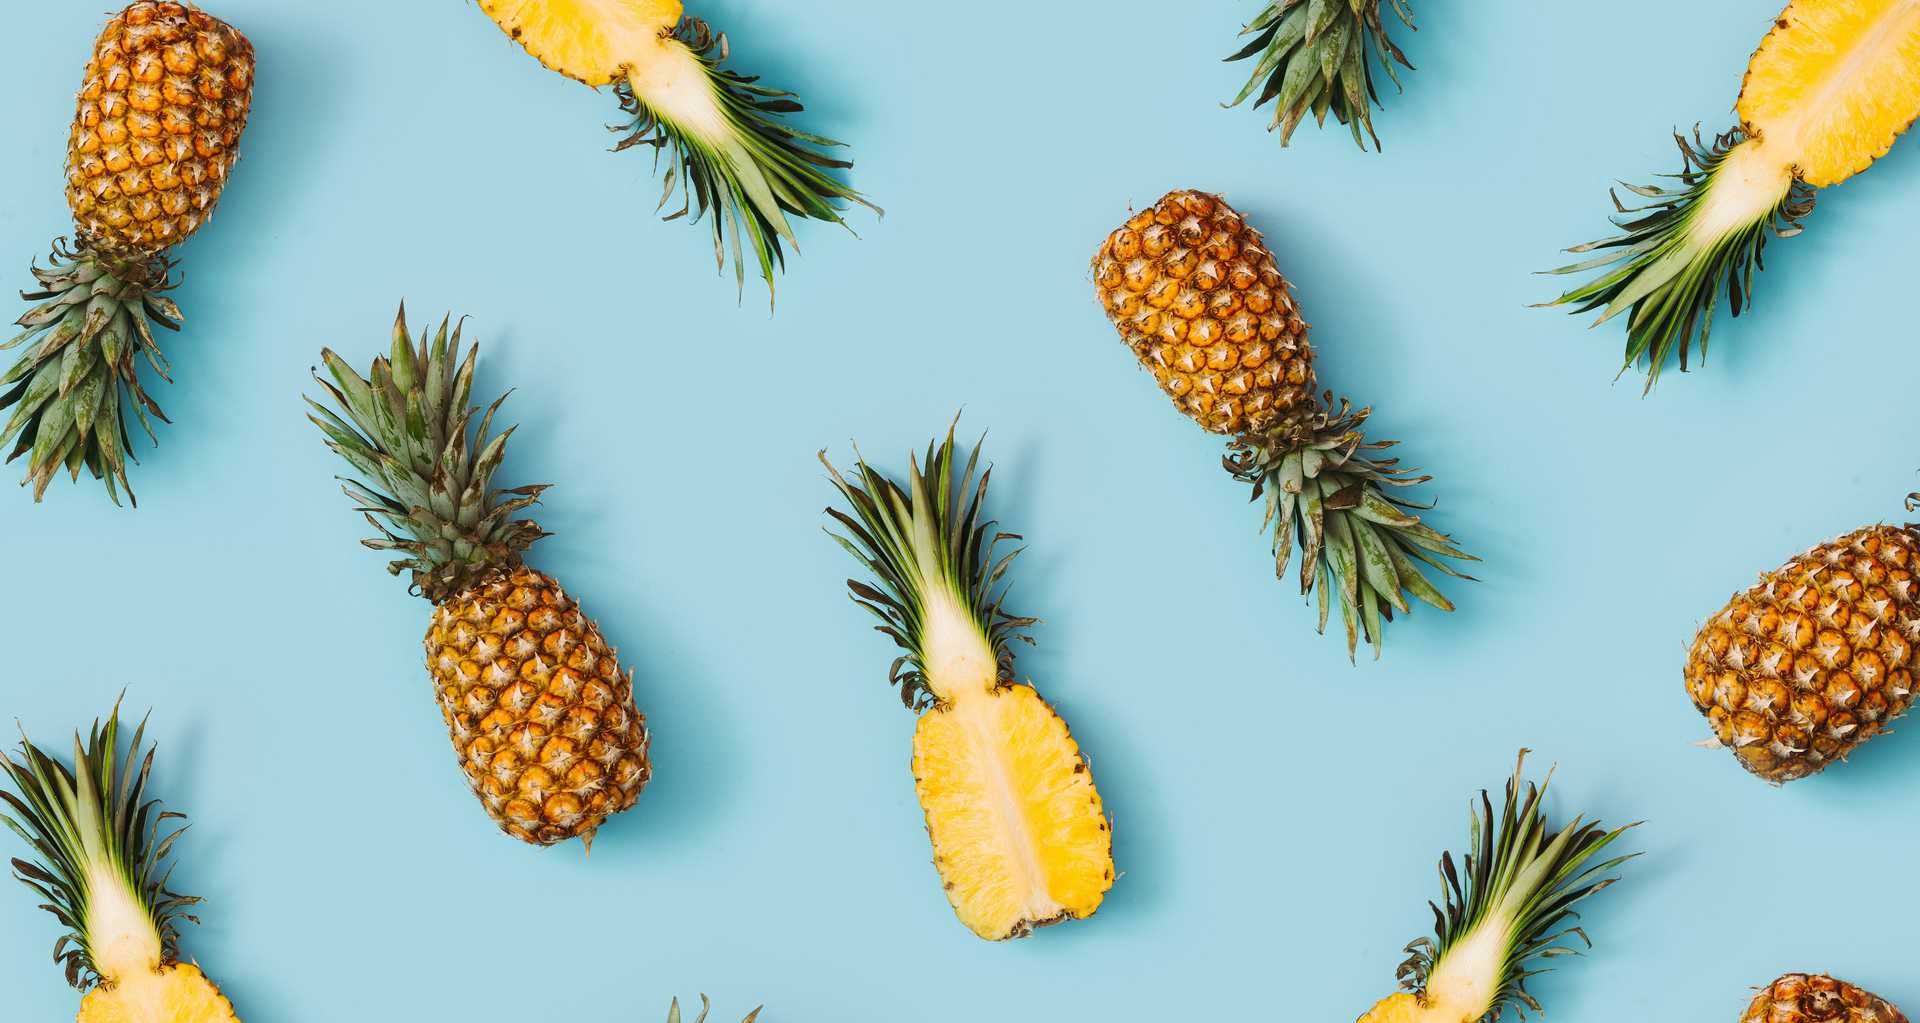 Hero background image of many pineapples